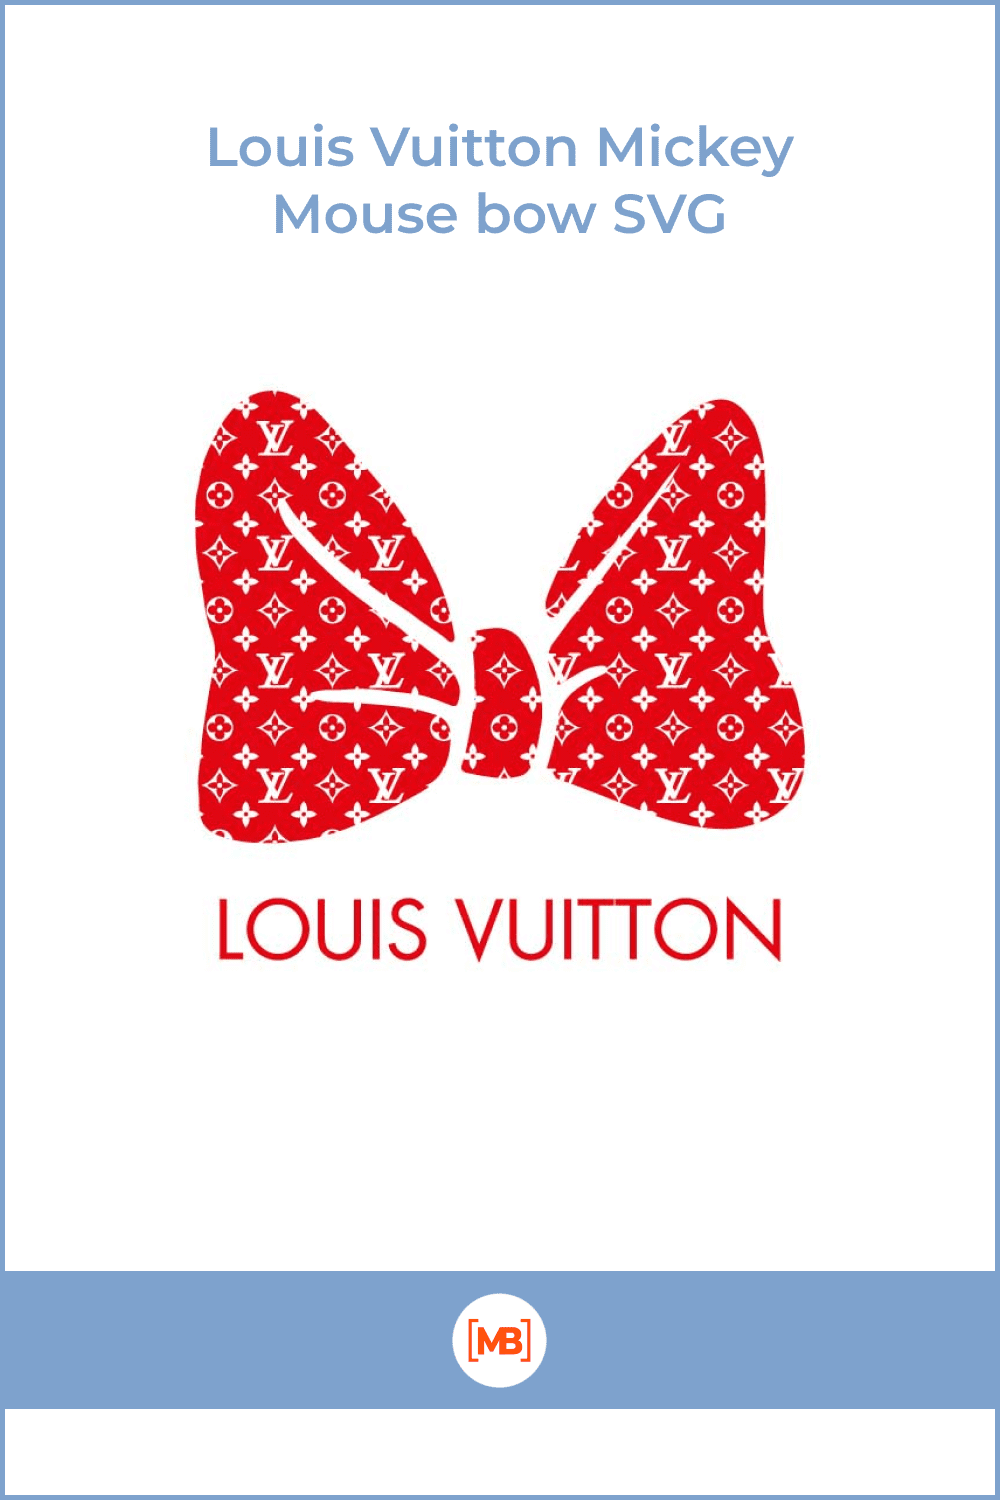 Louis Vuitton Mickey Mouse bow SVG.